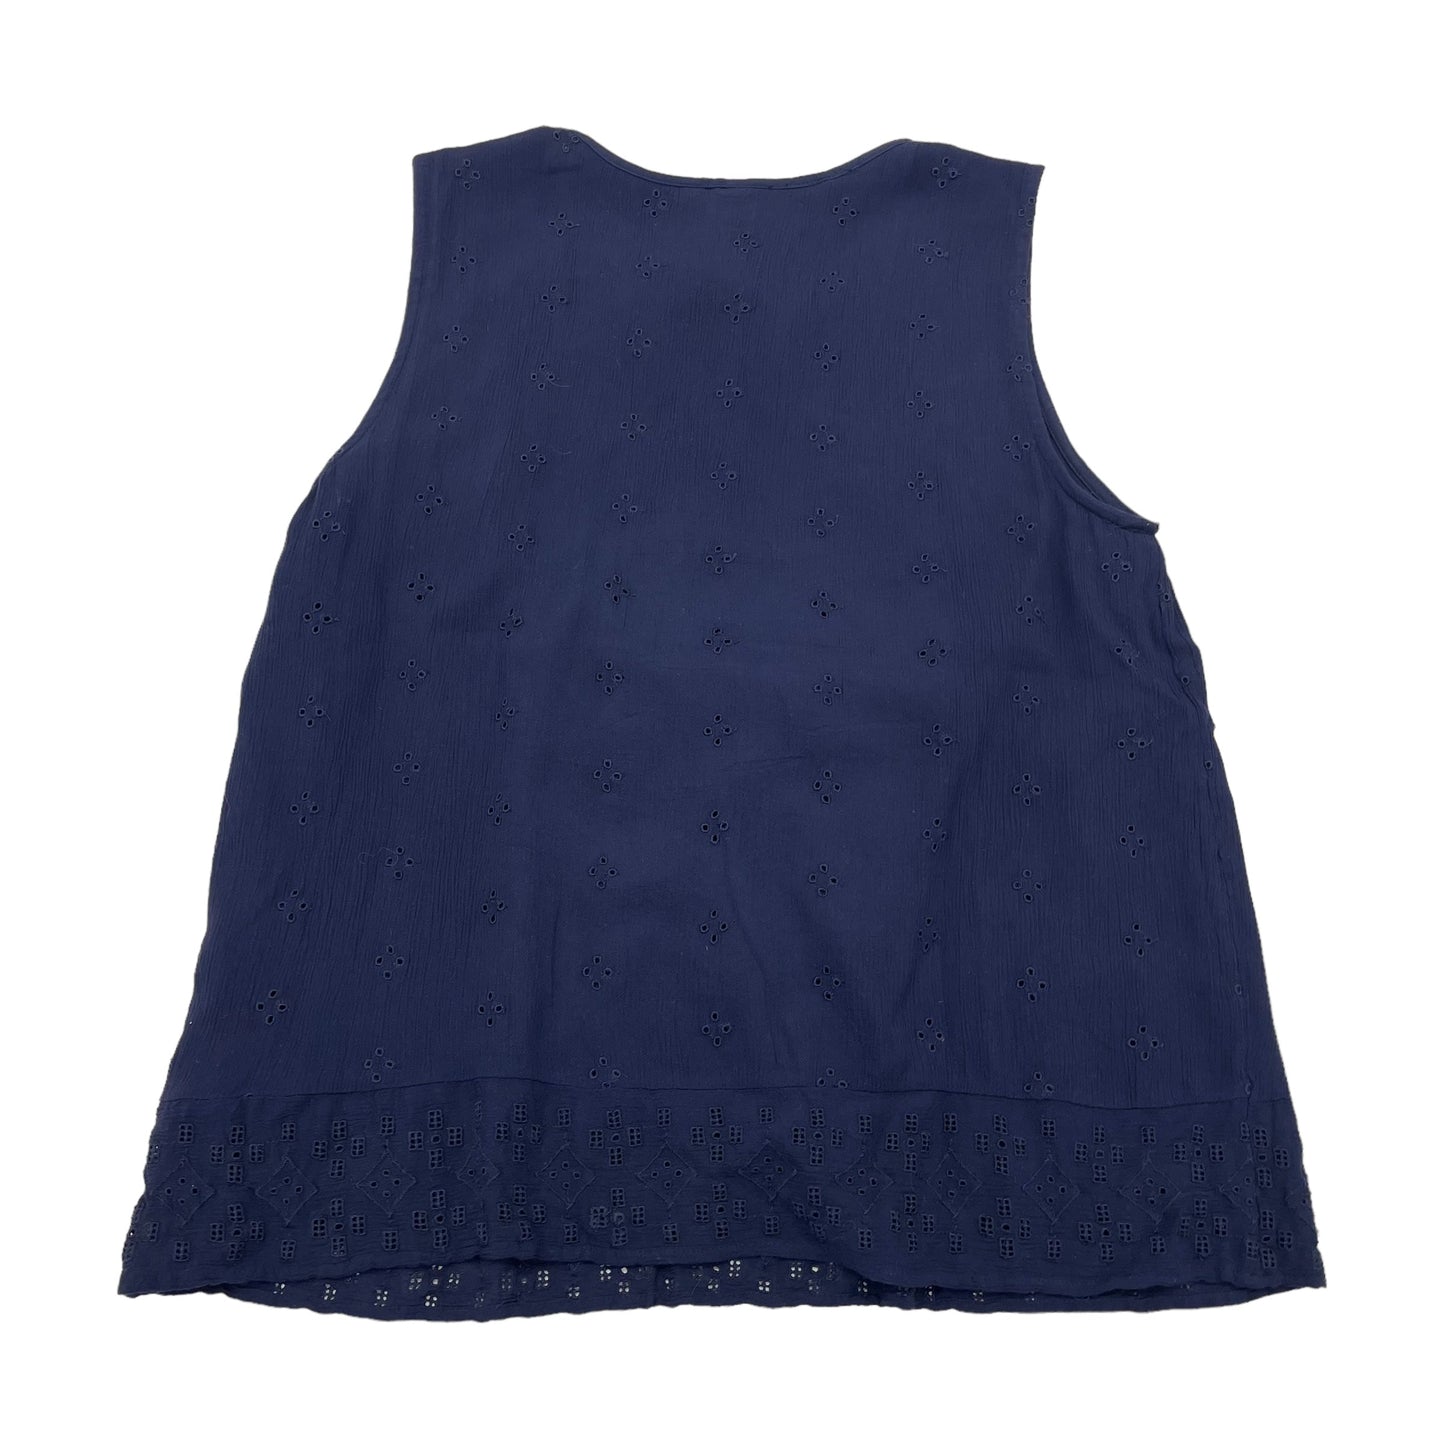 NAVY TOP SLEEVELESS by GAP Size:M